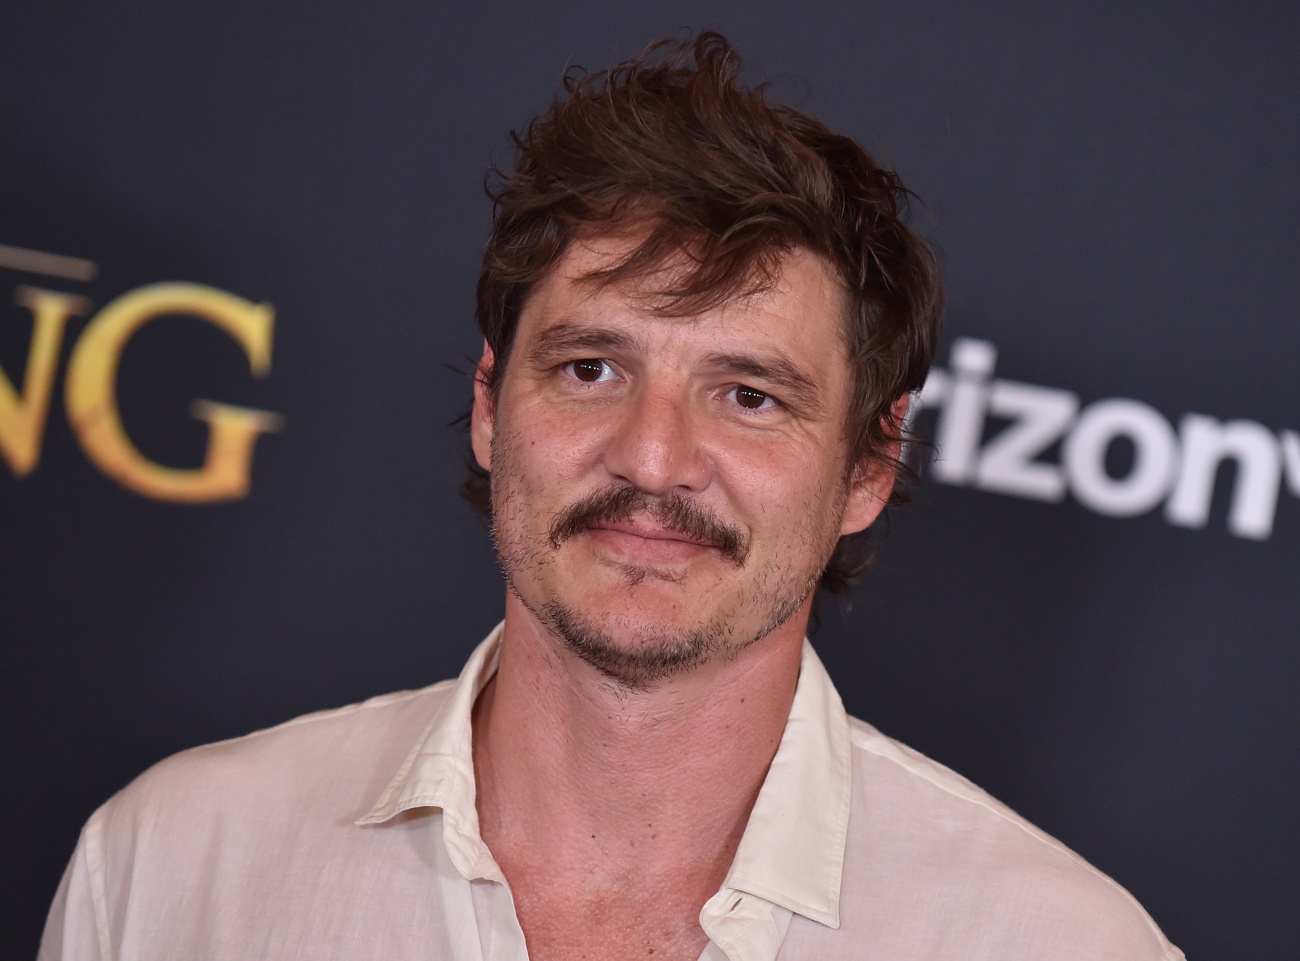 Pedro Pascal shares surprising story: fan gives him eye infection after performing famous ‘Game of Thrones’ scene